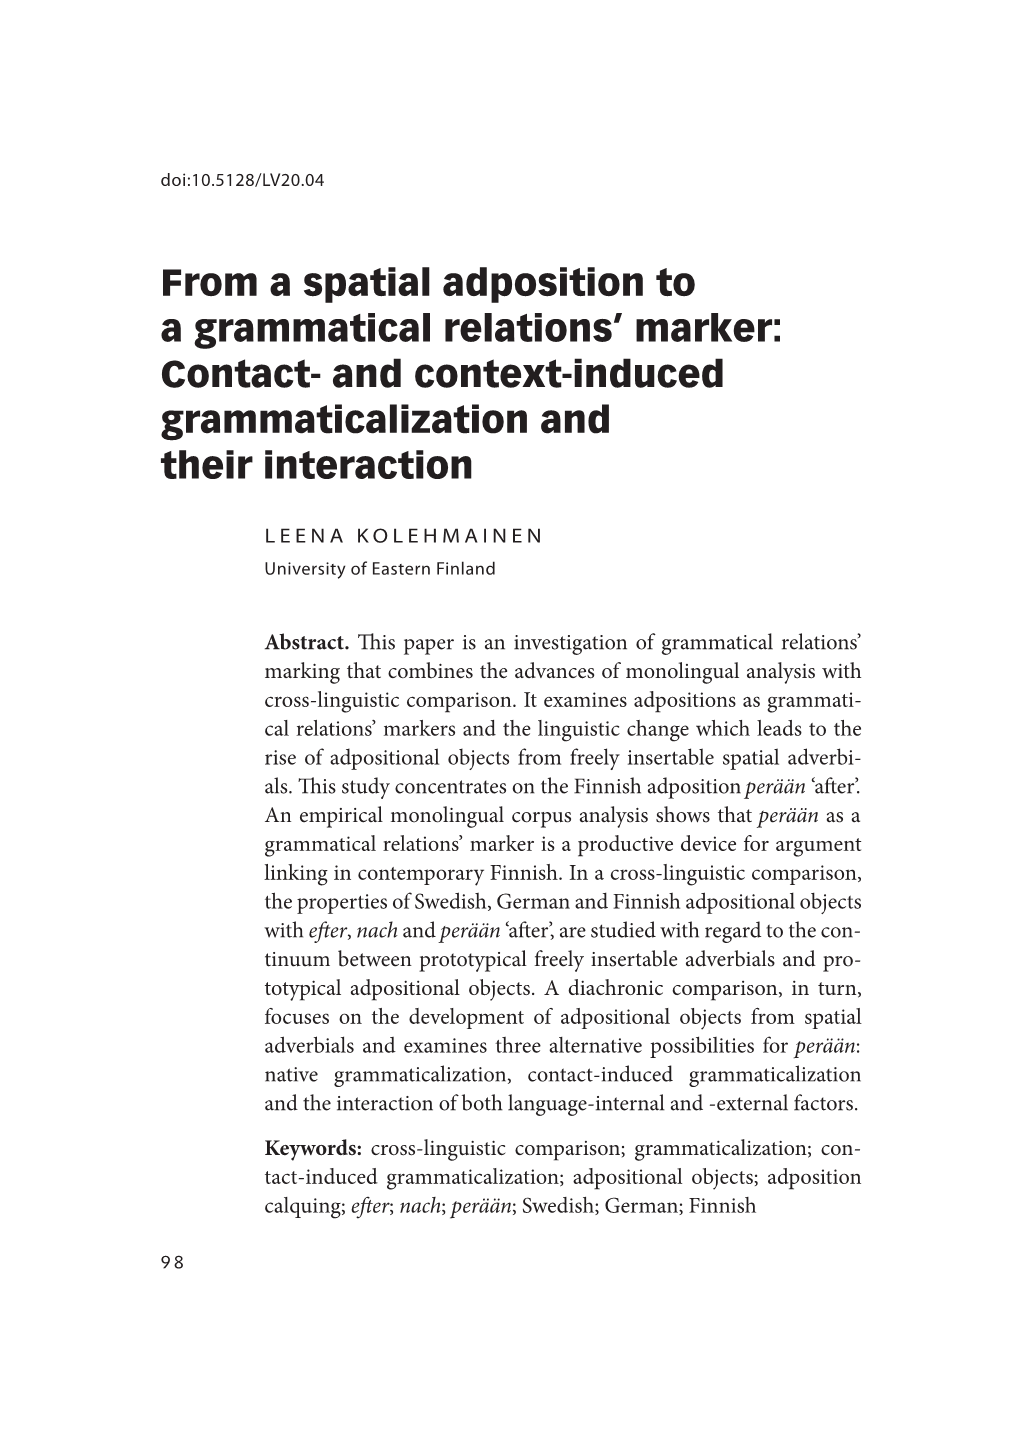 From a Spatial Adposition to a Grammatical Relations’ Marker: Contact- and Context-Induced Grammaticalization and Their Interaction